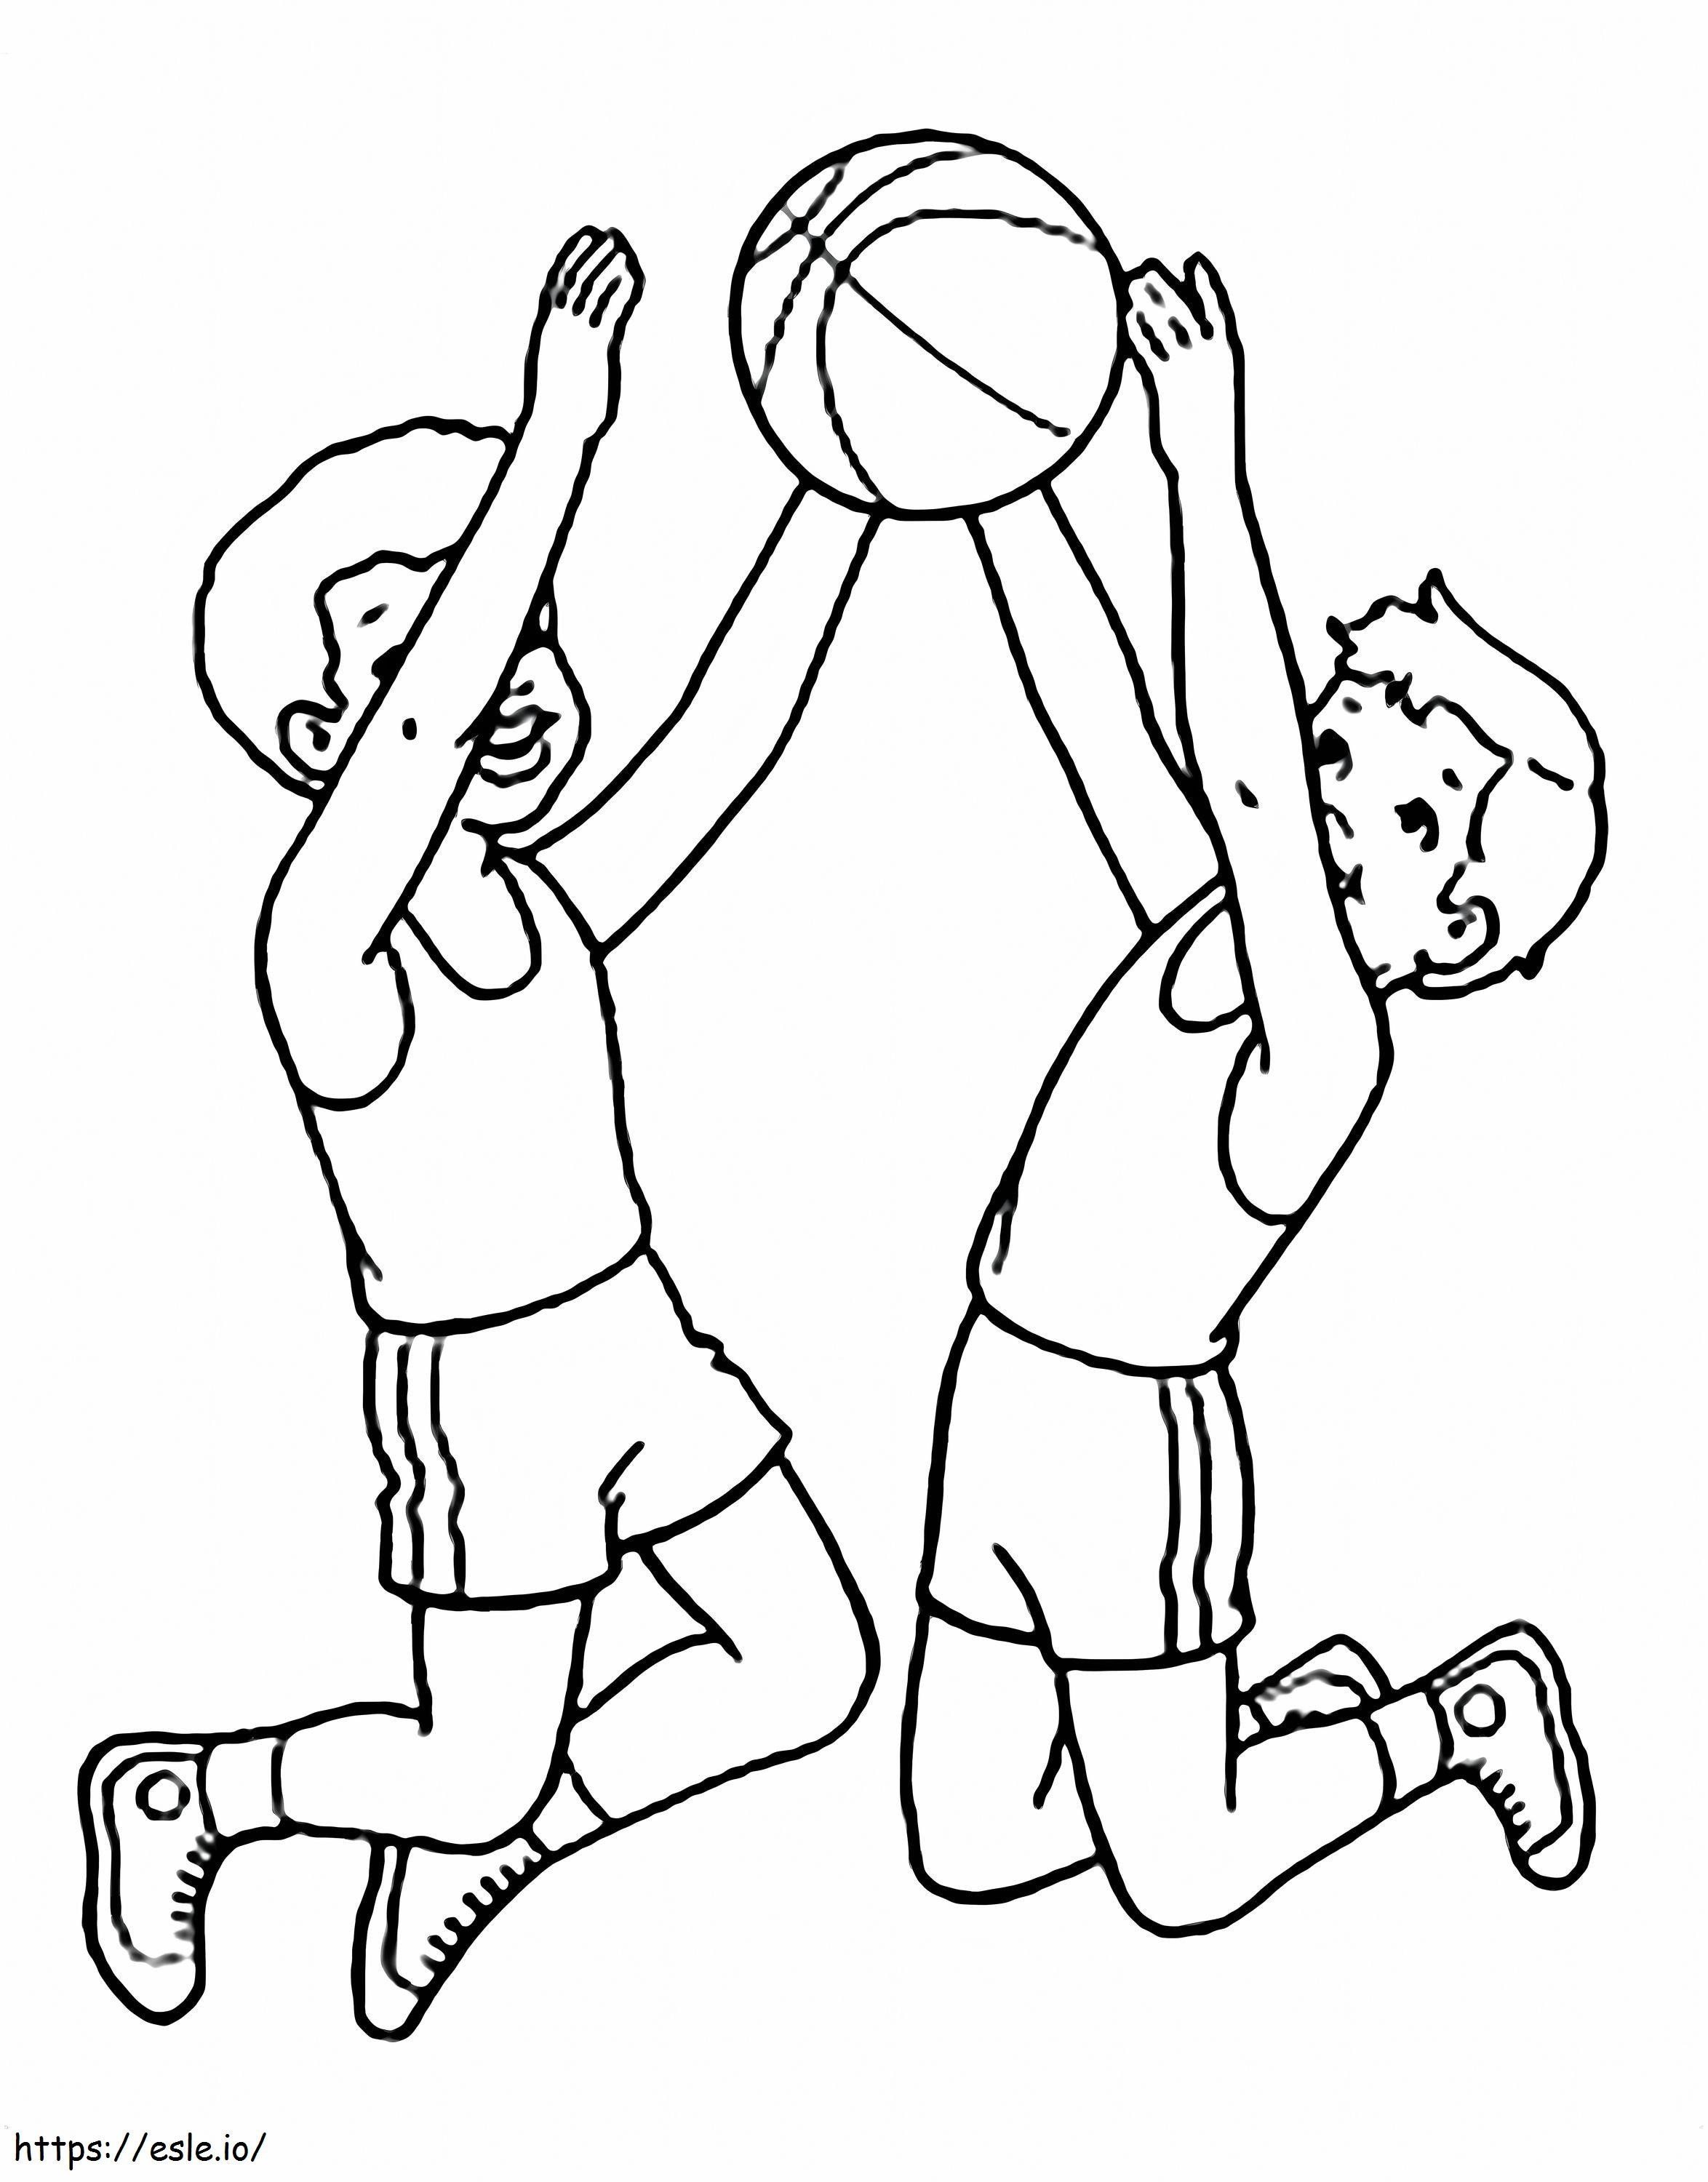 Basketball For Kids coloring page